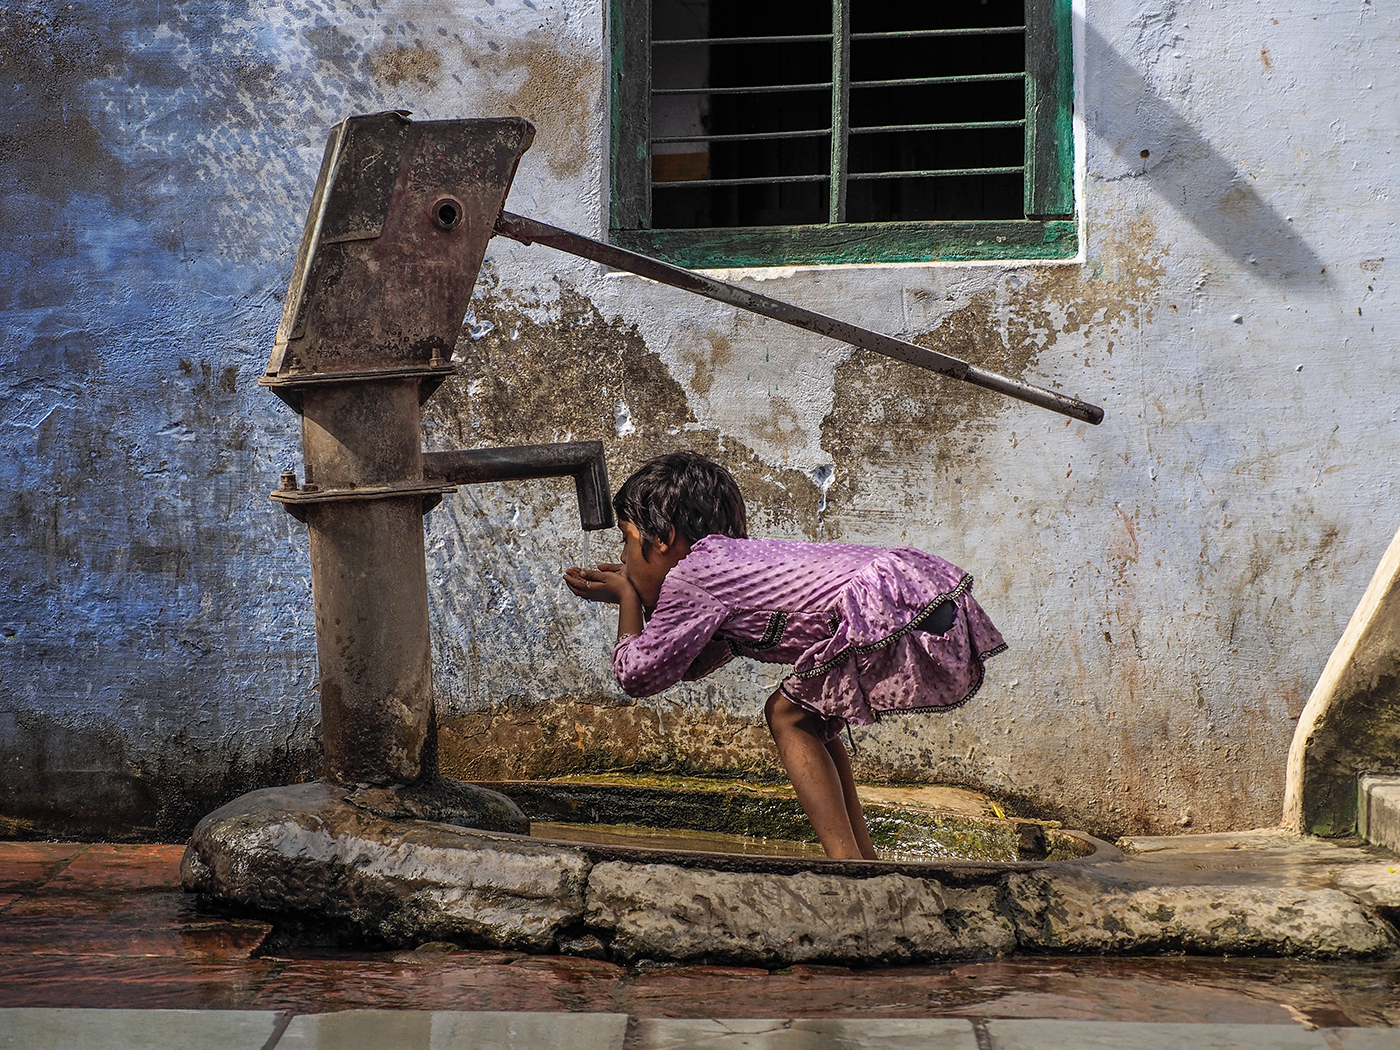 A young girl drinks from village water pump in Kachhpura, India